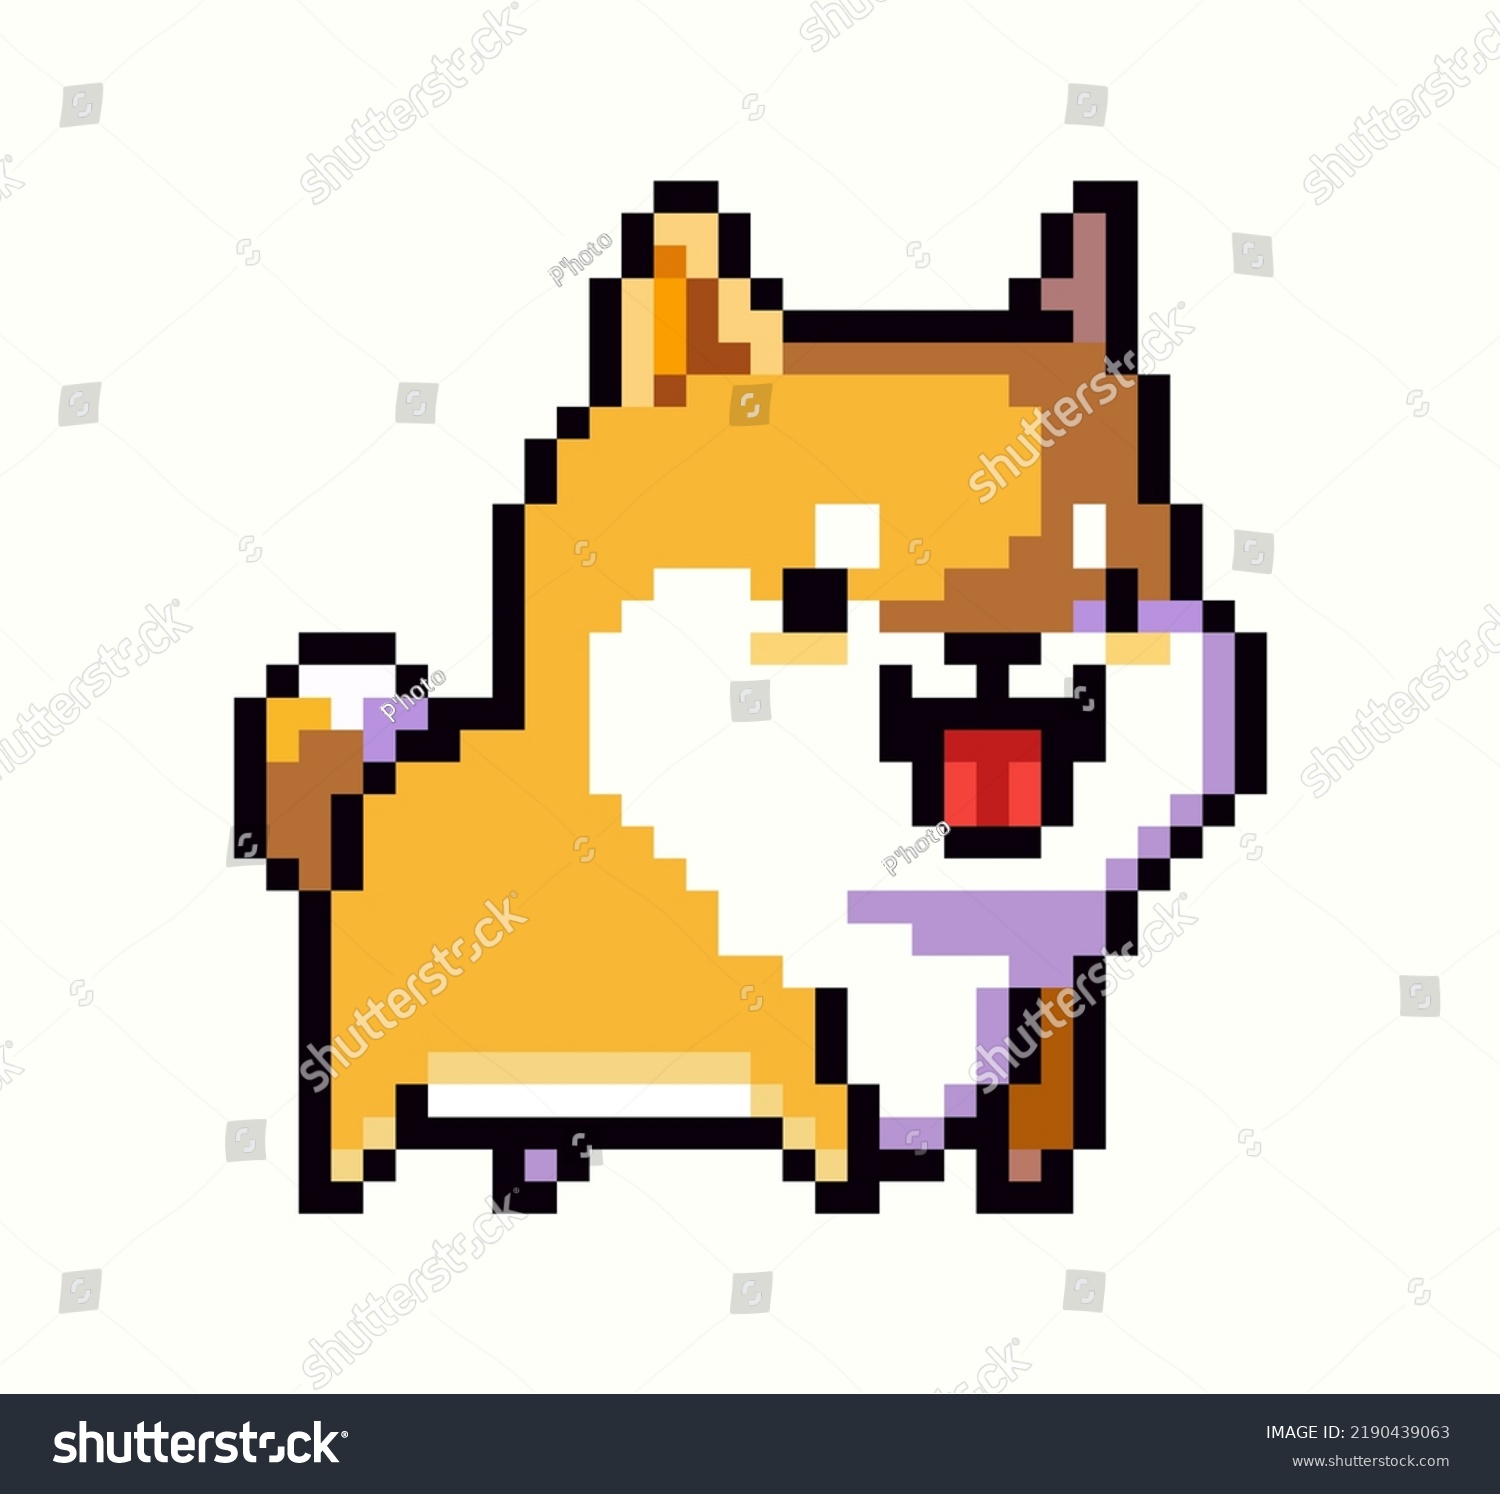 Dog Pixel Art On White Background Stock Vector (Royalty Free ...